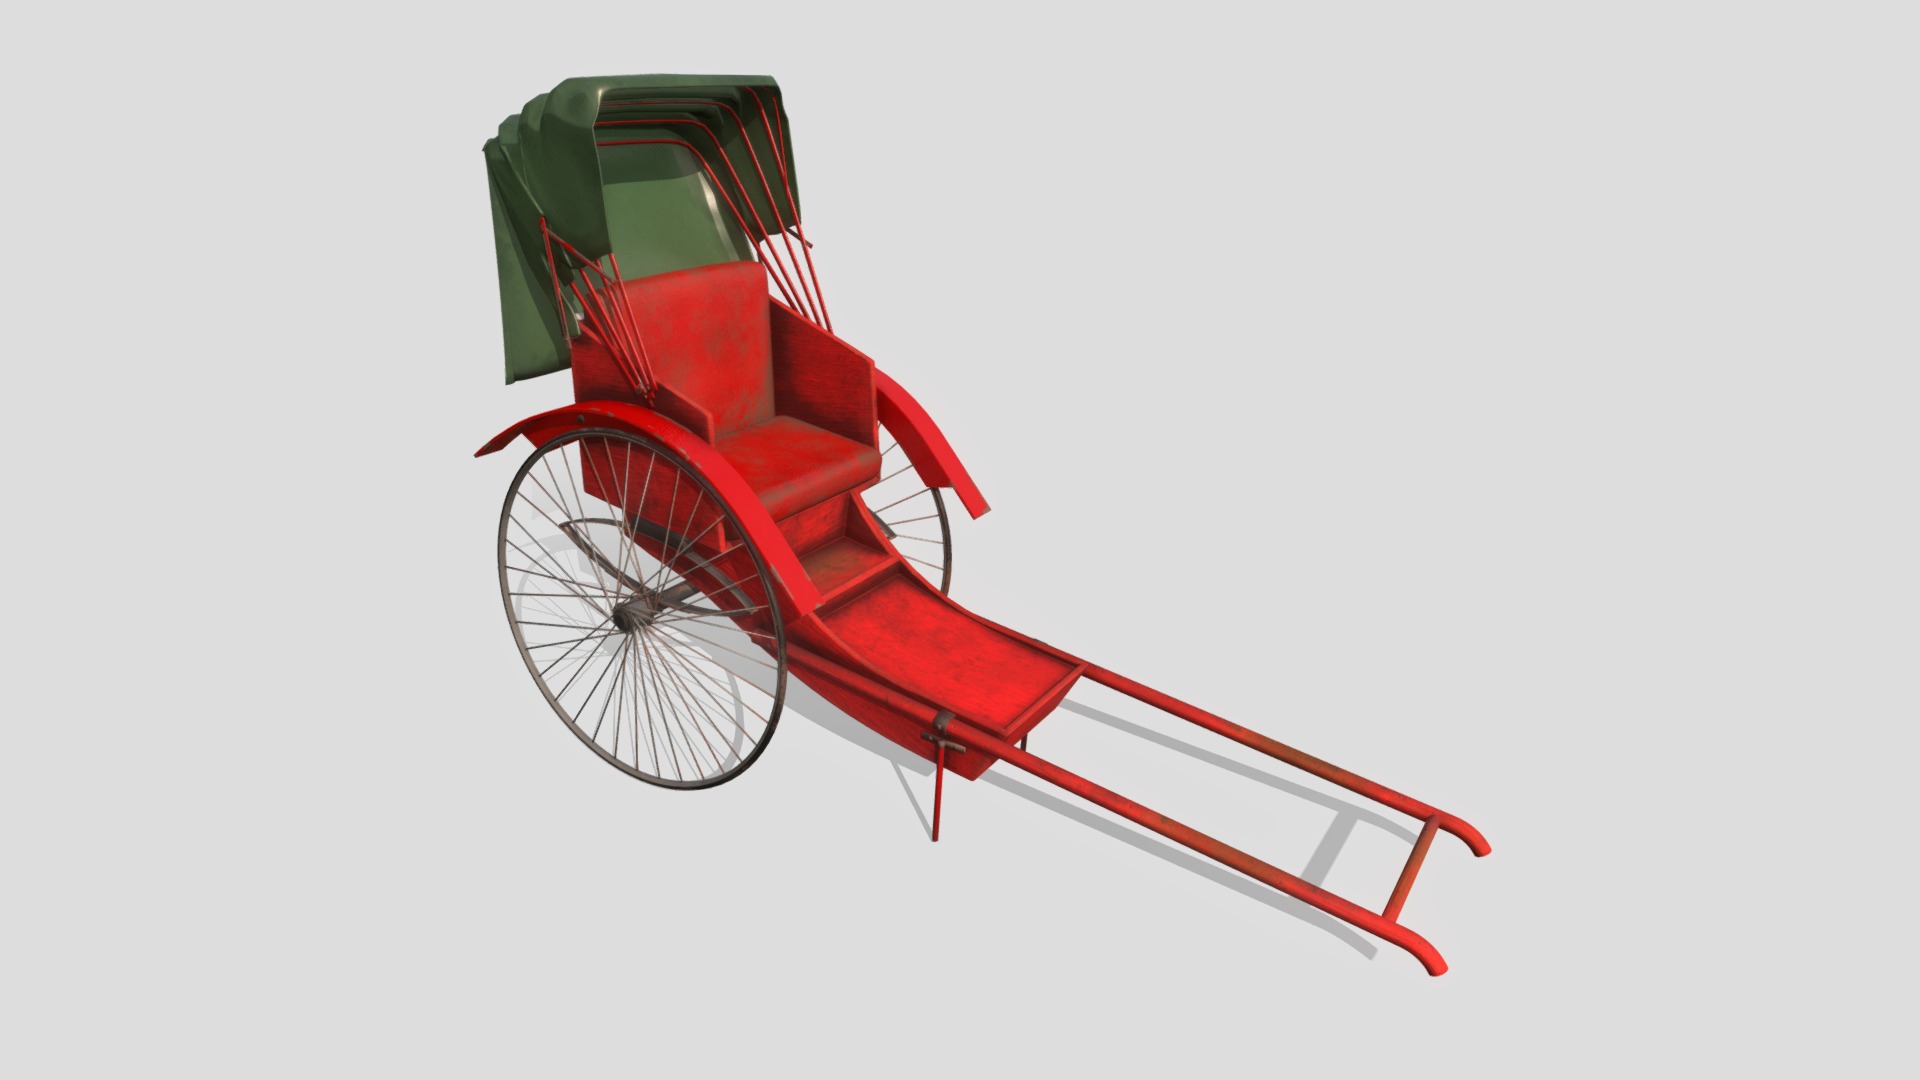 3D model Hong Kong Rickshaw Version 2 - This is a 3D model of the Hong Kong Rickshaw Version 2. The 3D model is about a red and green bicycle.